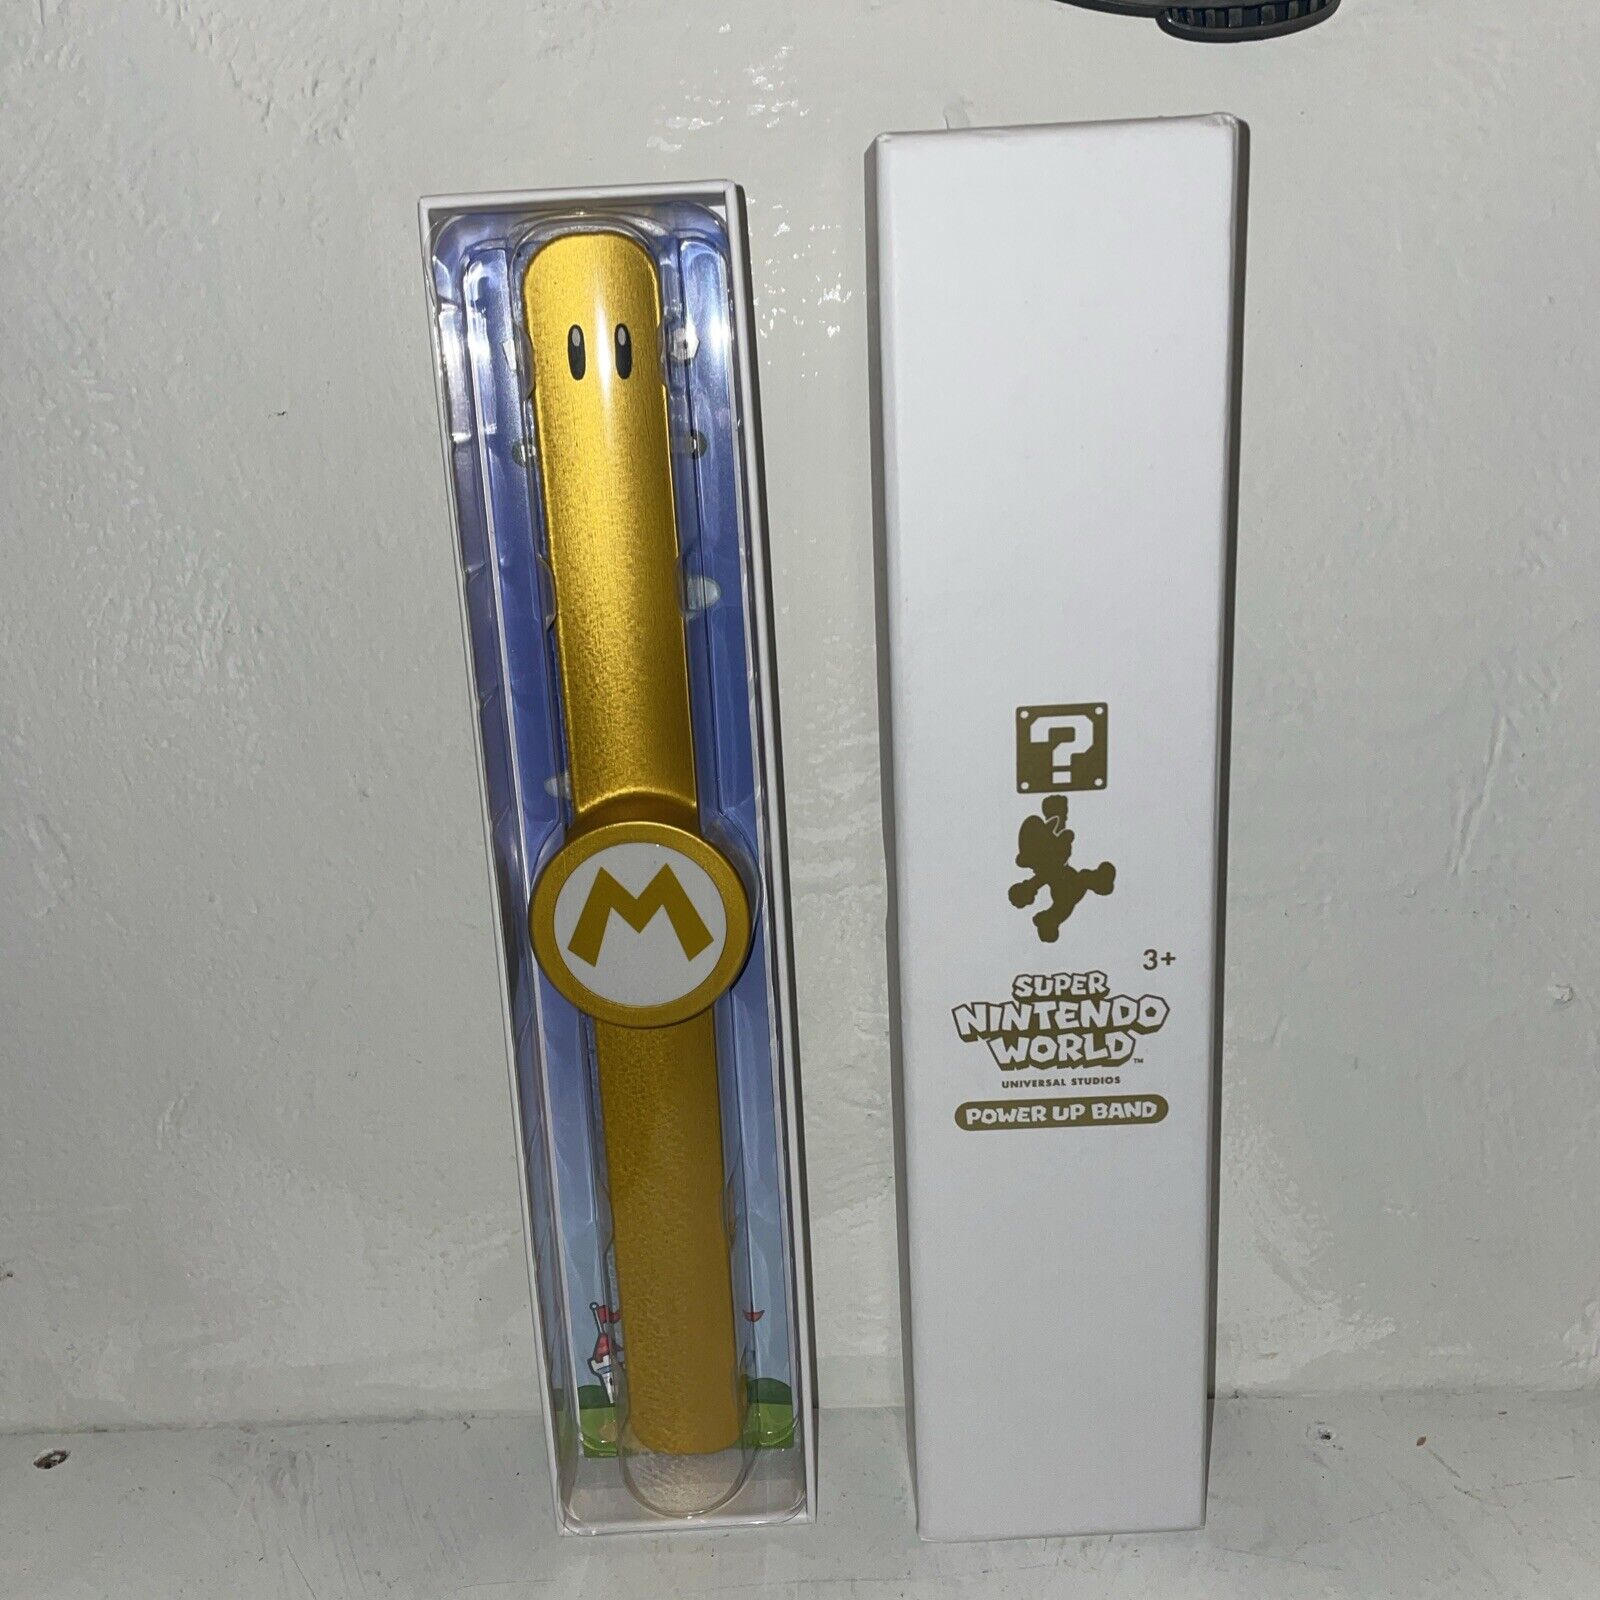 USJ exclusive MARIO GOLDEN POWER UP BAND amiibo Universal Japan number limied